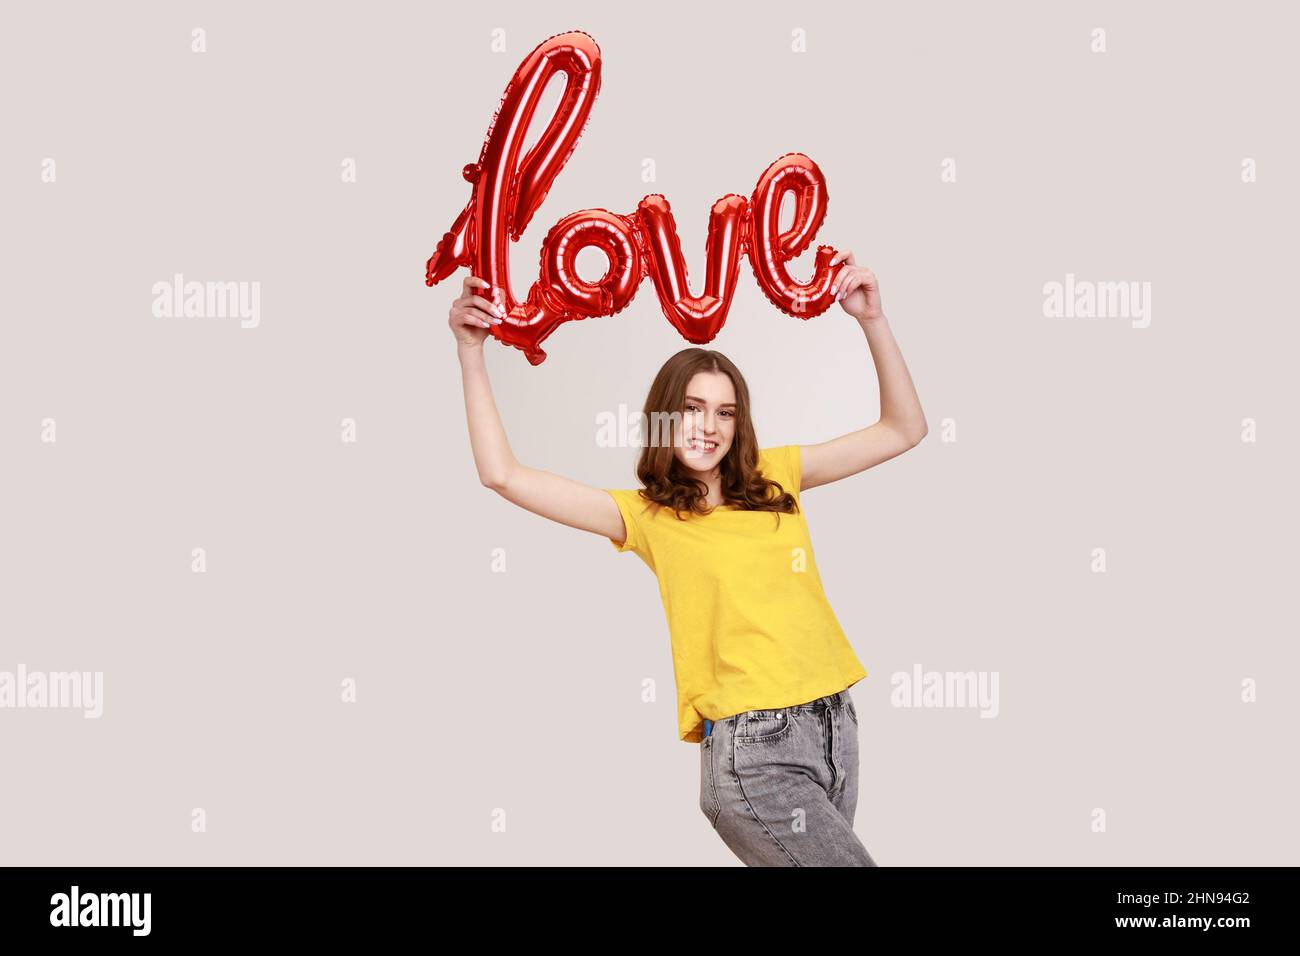 Beautiful brown haired female of young age holding balloons letters above her hear, raised arms with foil word love, wearing yellow T-shirt. Indoor studio shot isolated on gray background. Stock Photo